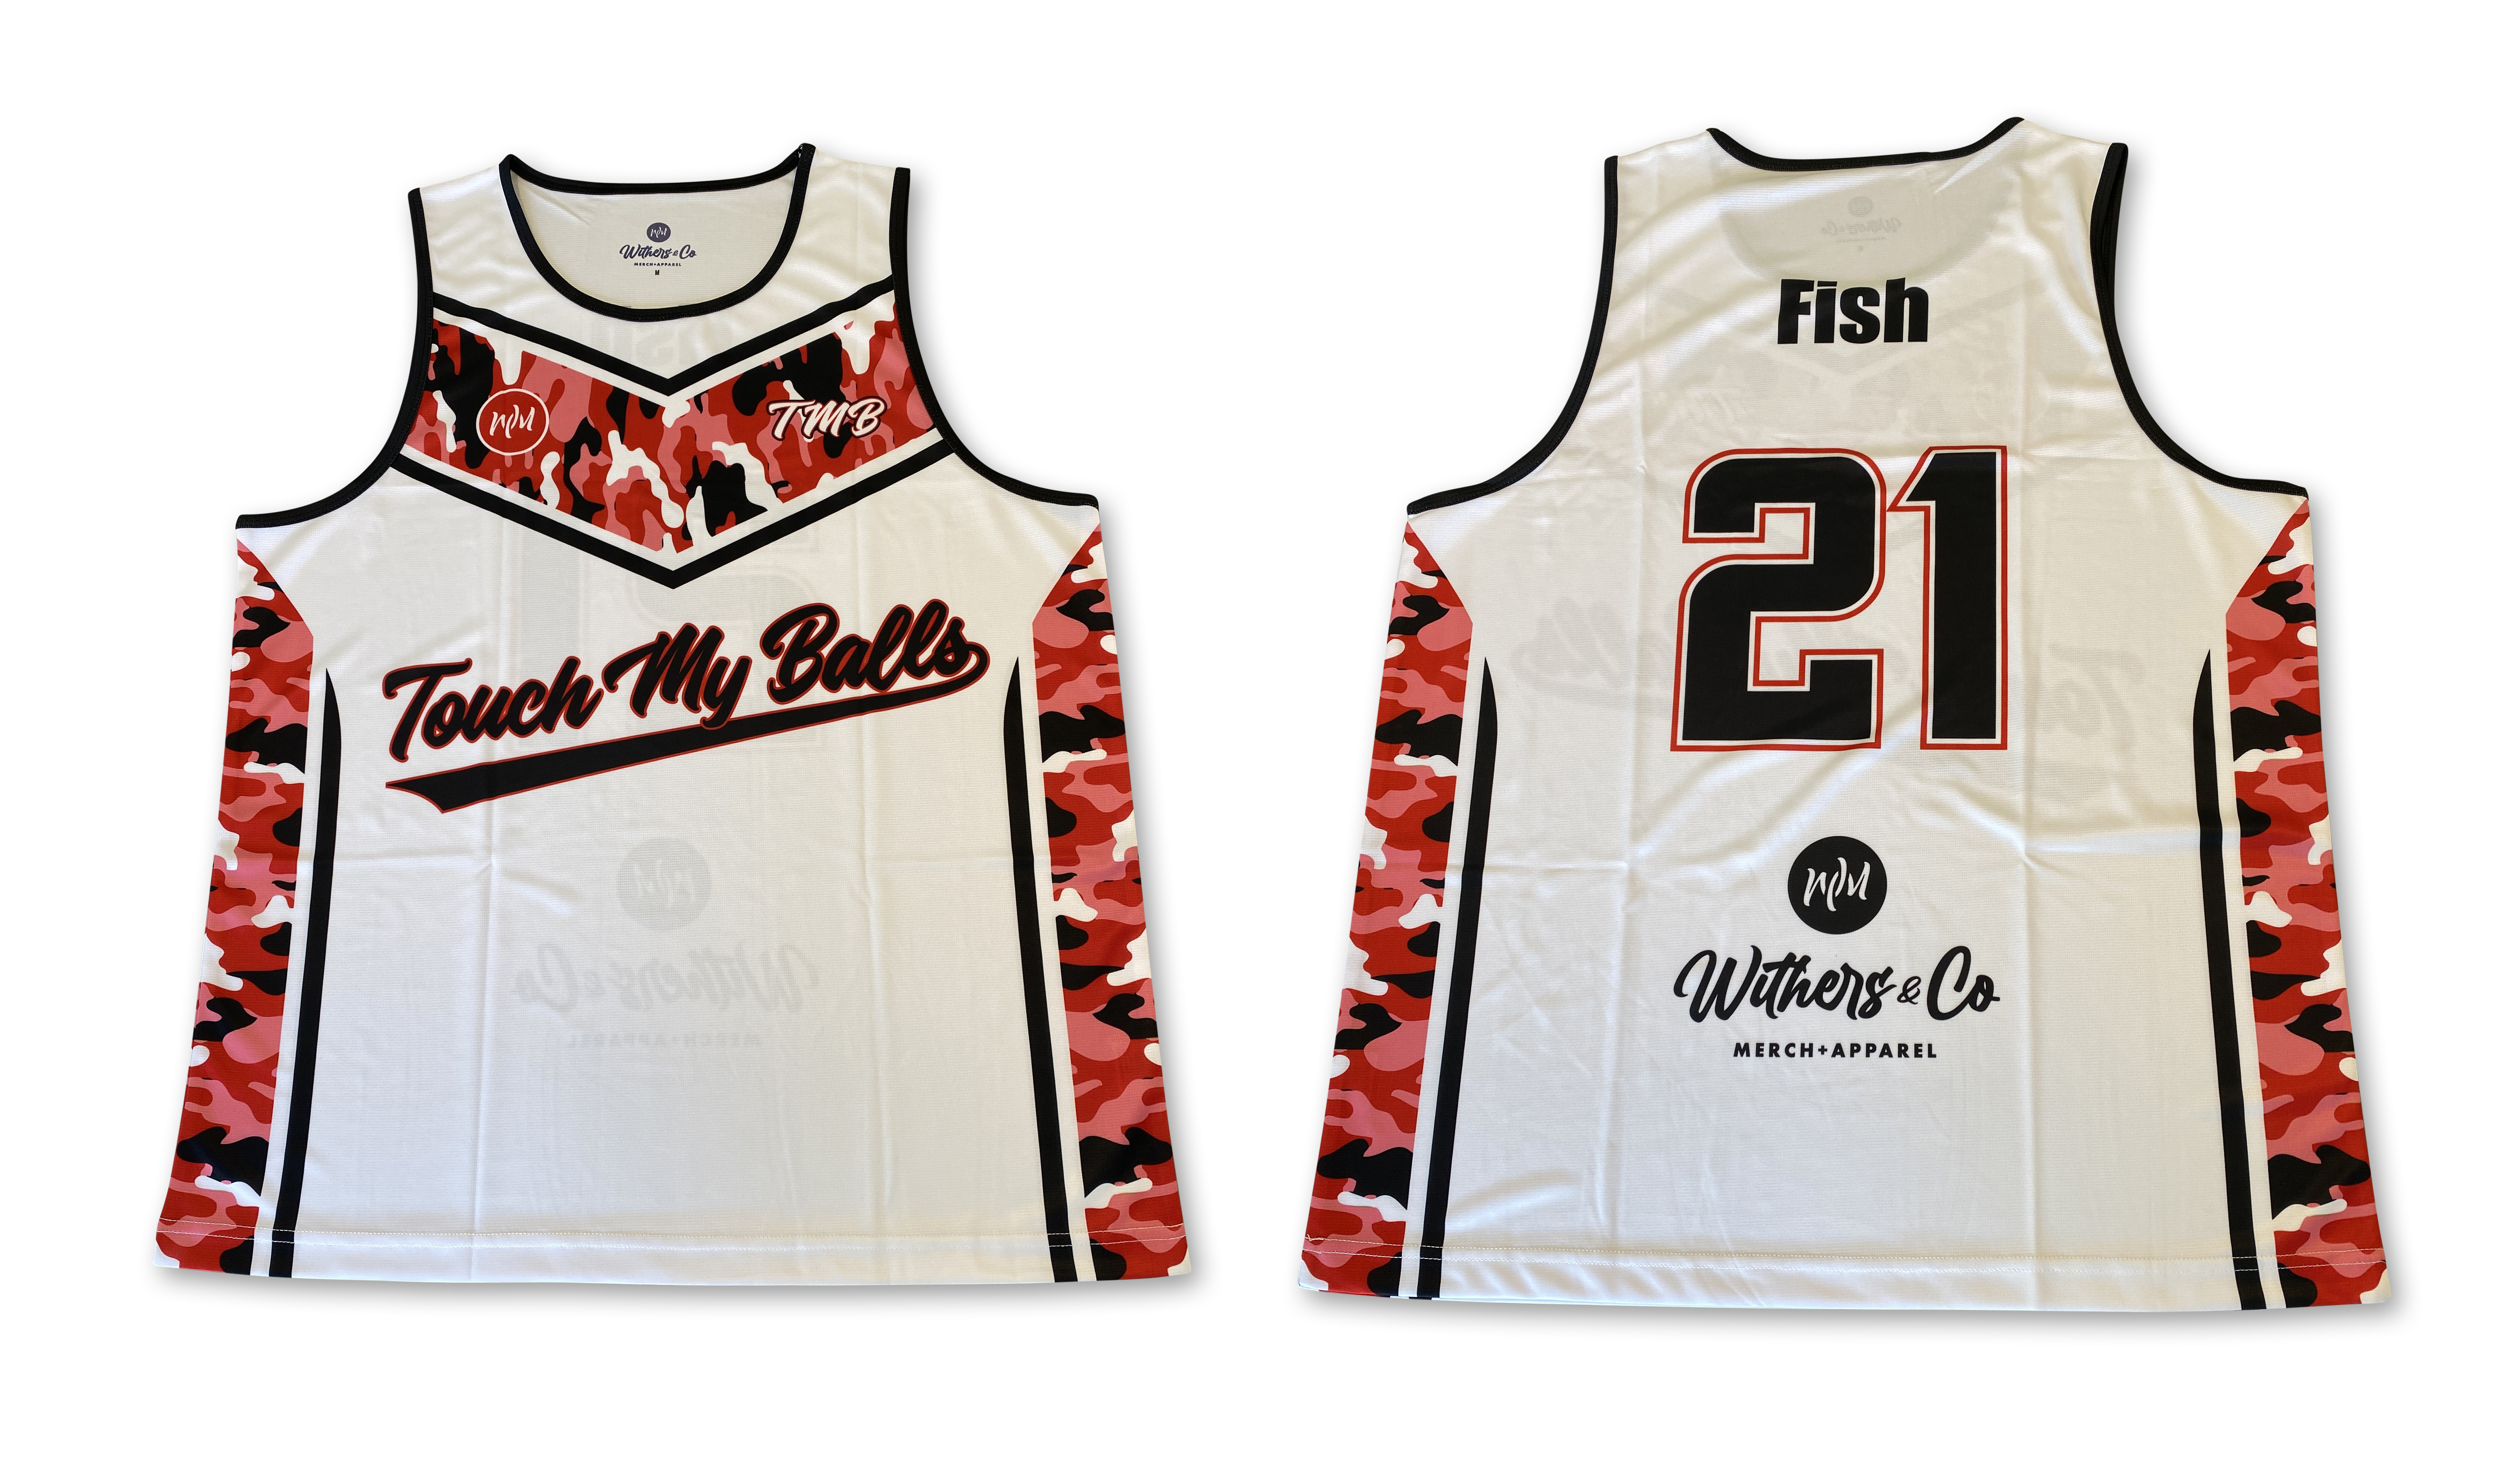 Sublimated apparel sublimated uniforms promotional products